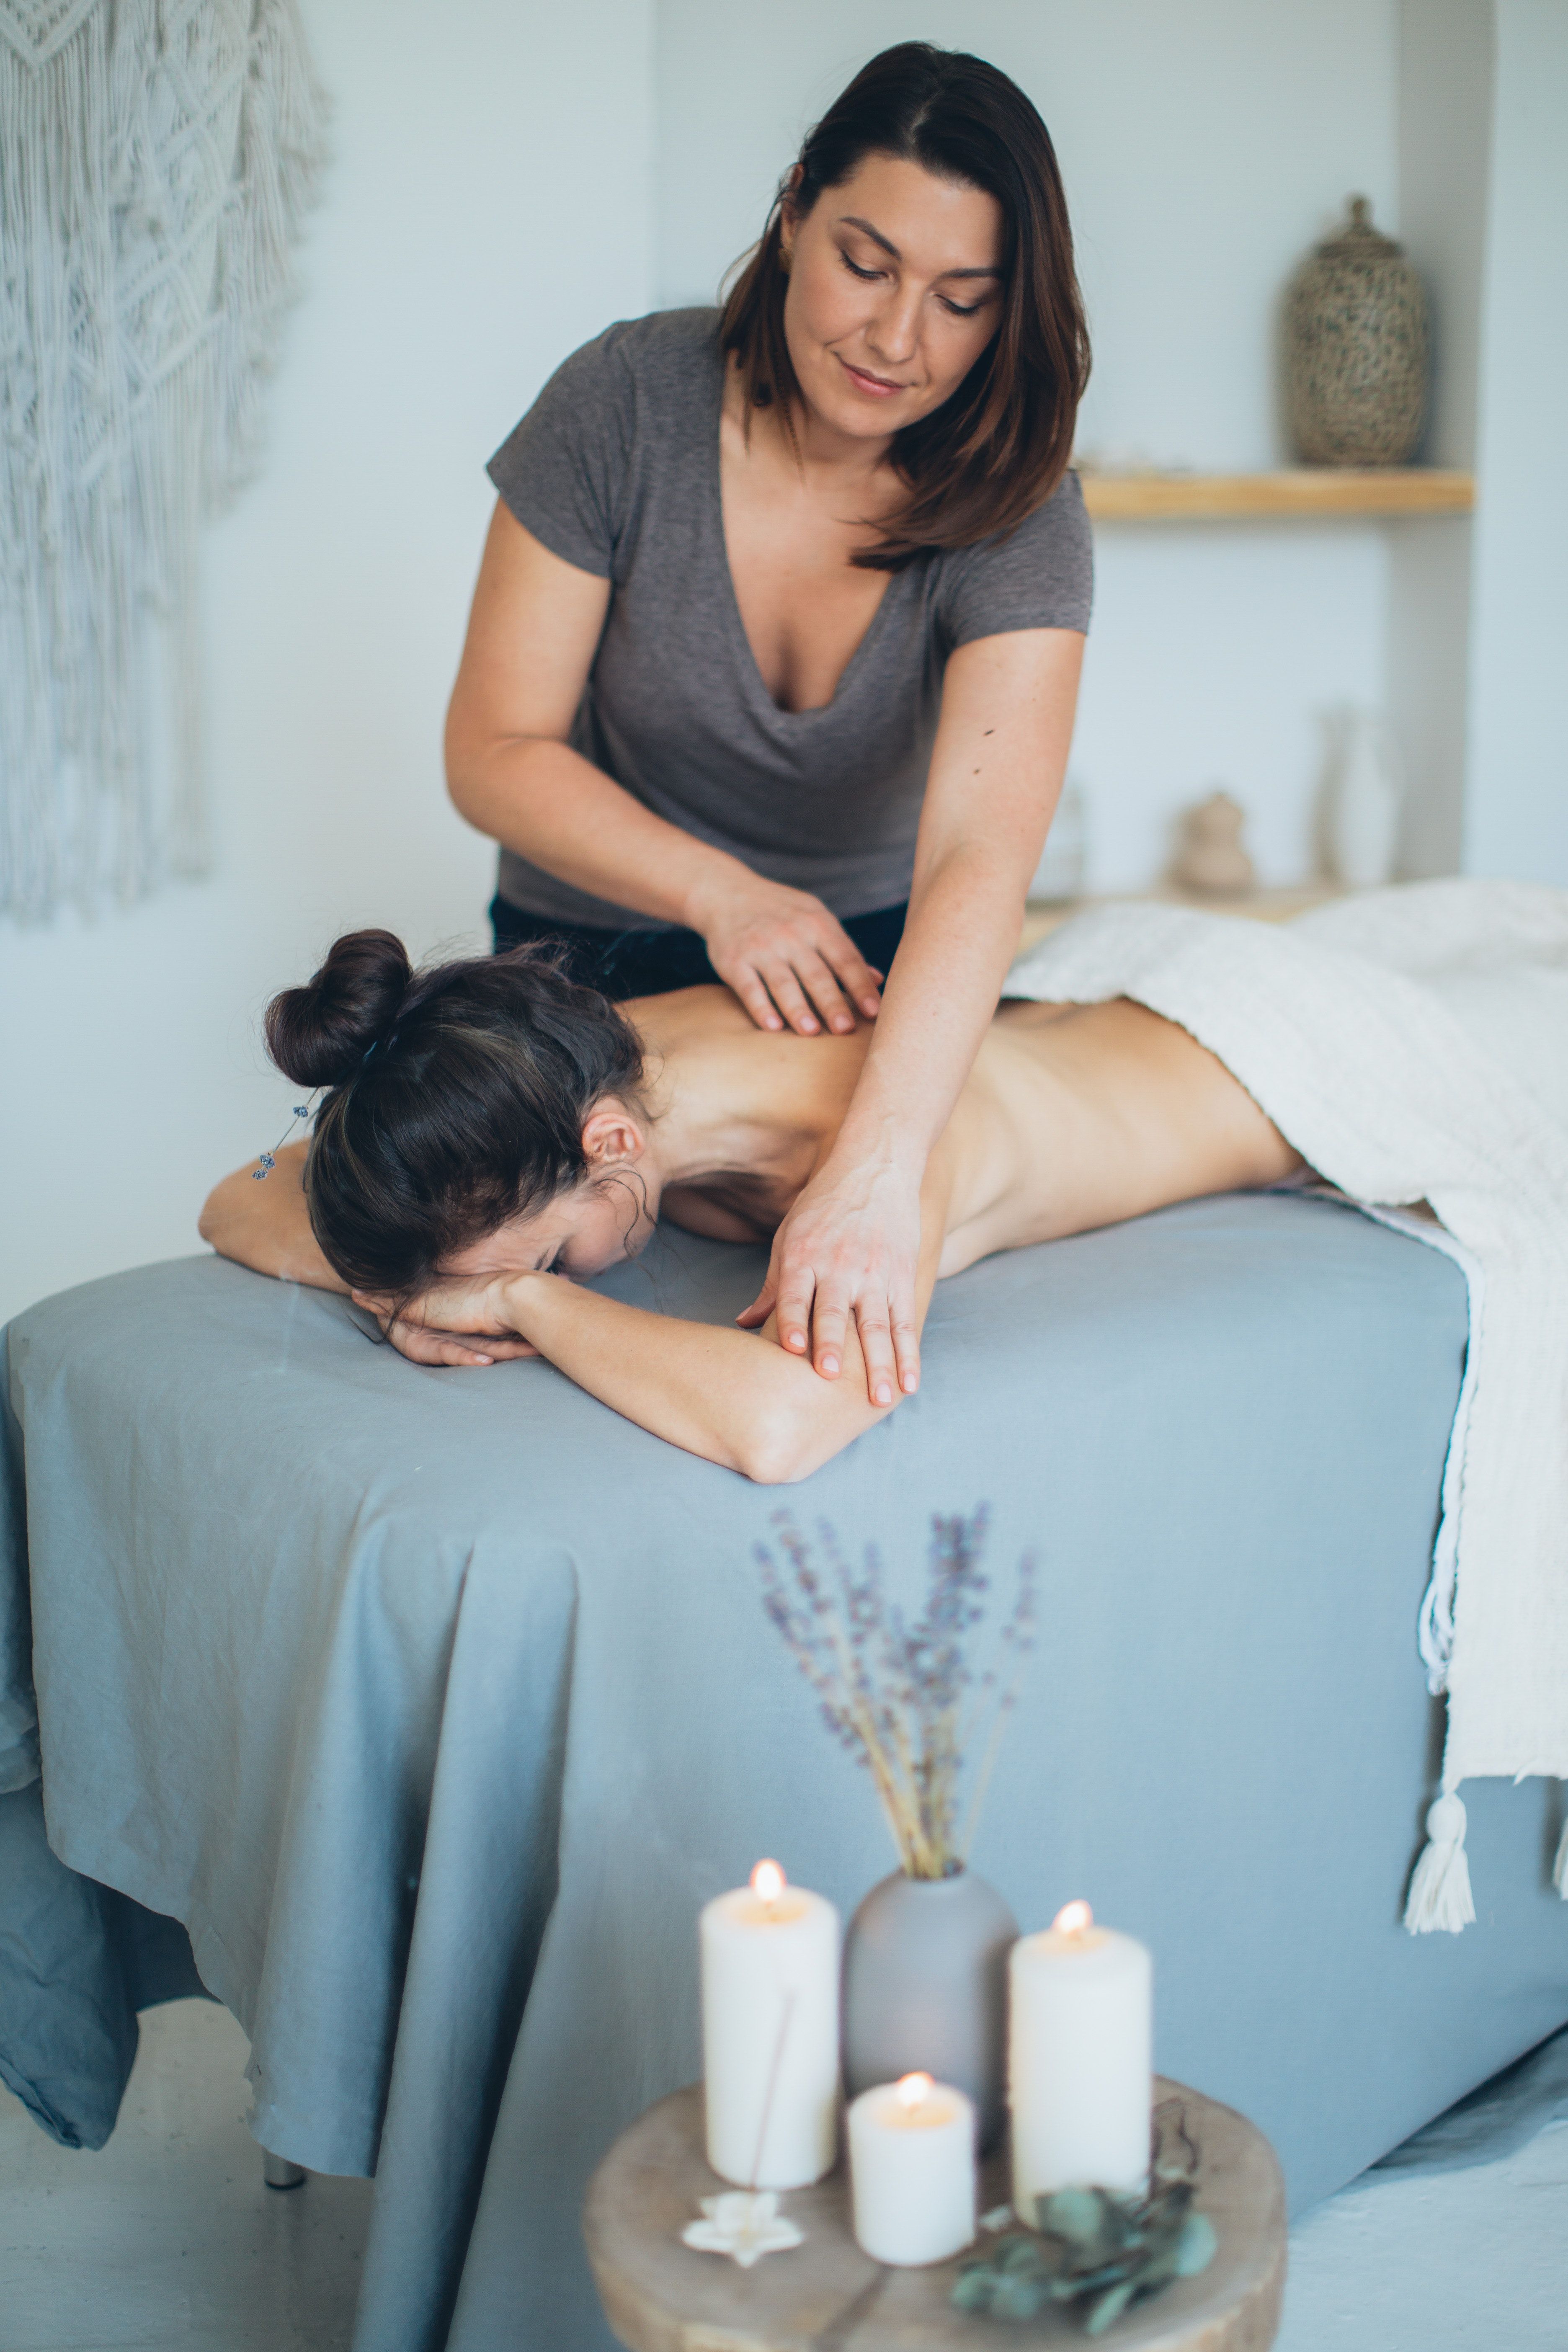 Try Massage for Managing Holiday Stress